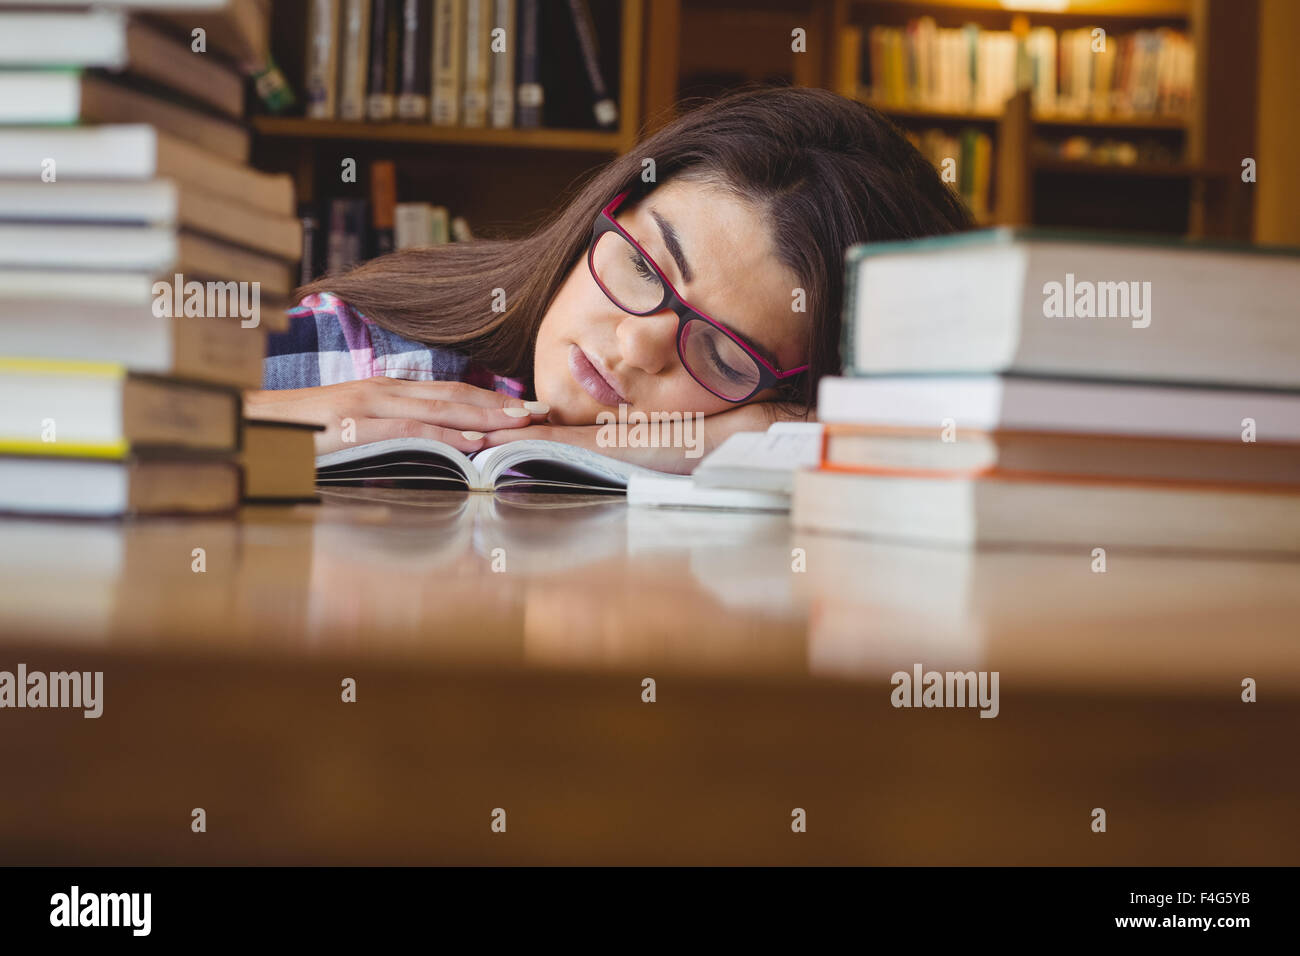 Female student napping with head on book Stock Photo